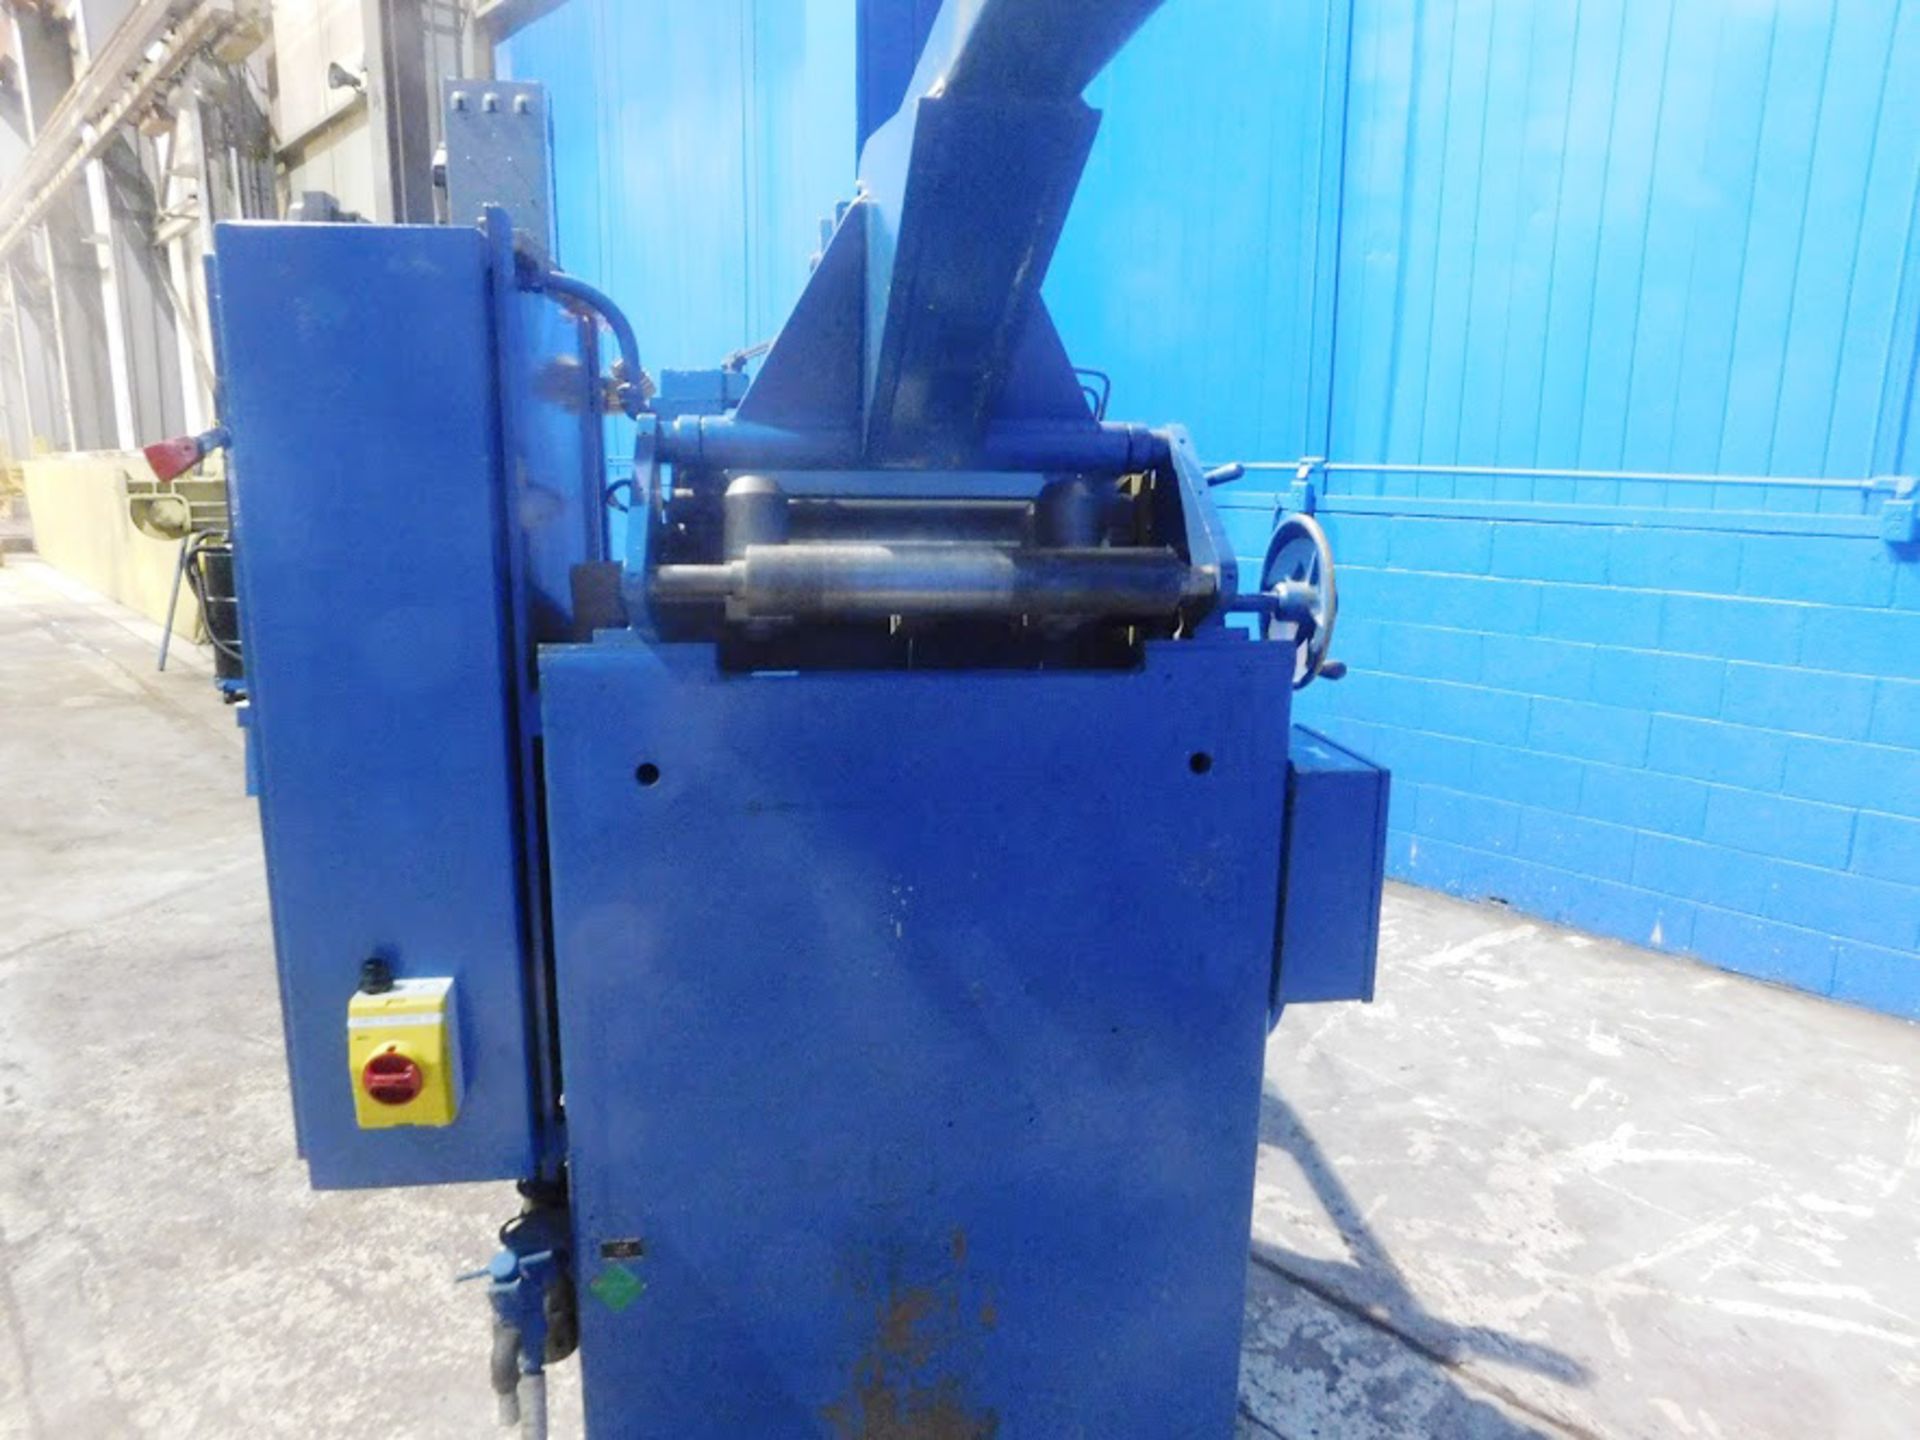 Littell Coil Straightener, 18" x 0.125", Mdl: 418-7PD, S/N: 86314-81 - Painesville, OH - 7581P - Image 3 of 14